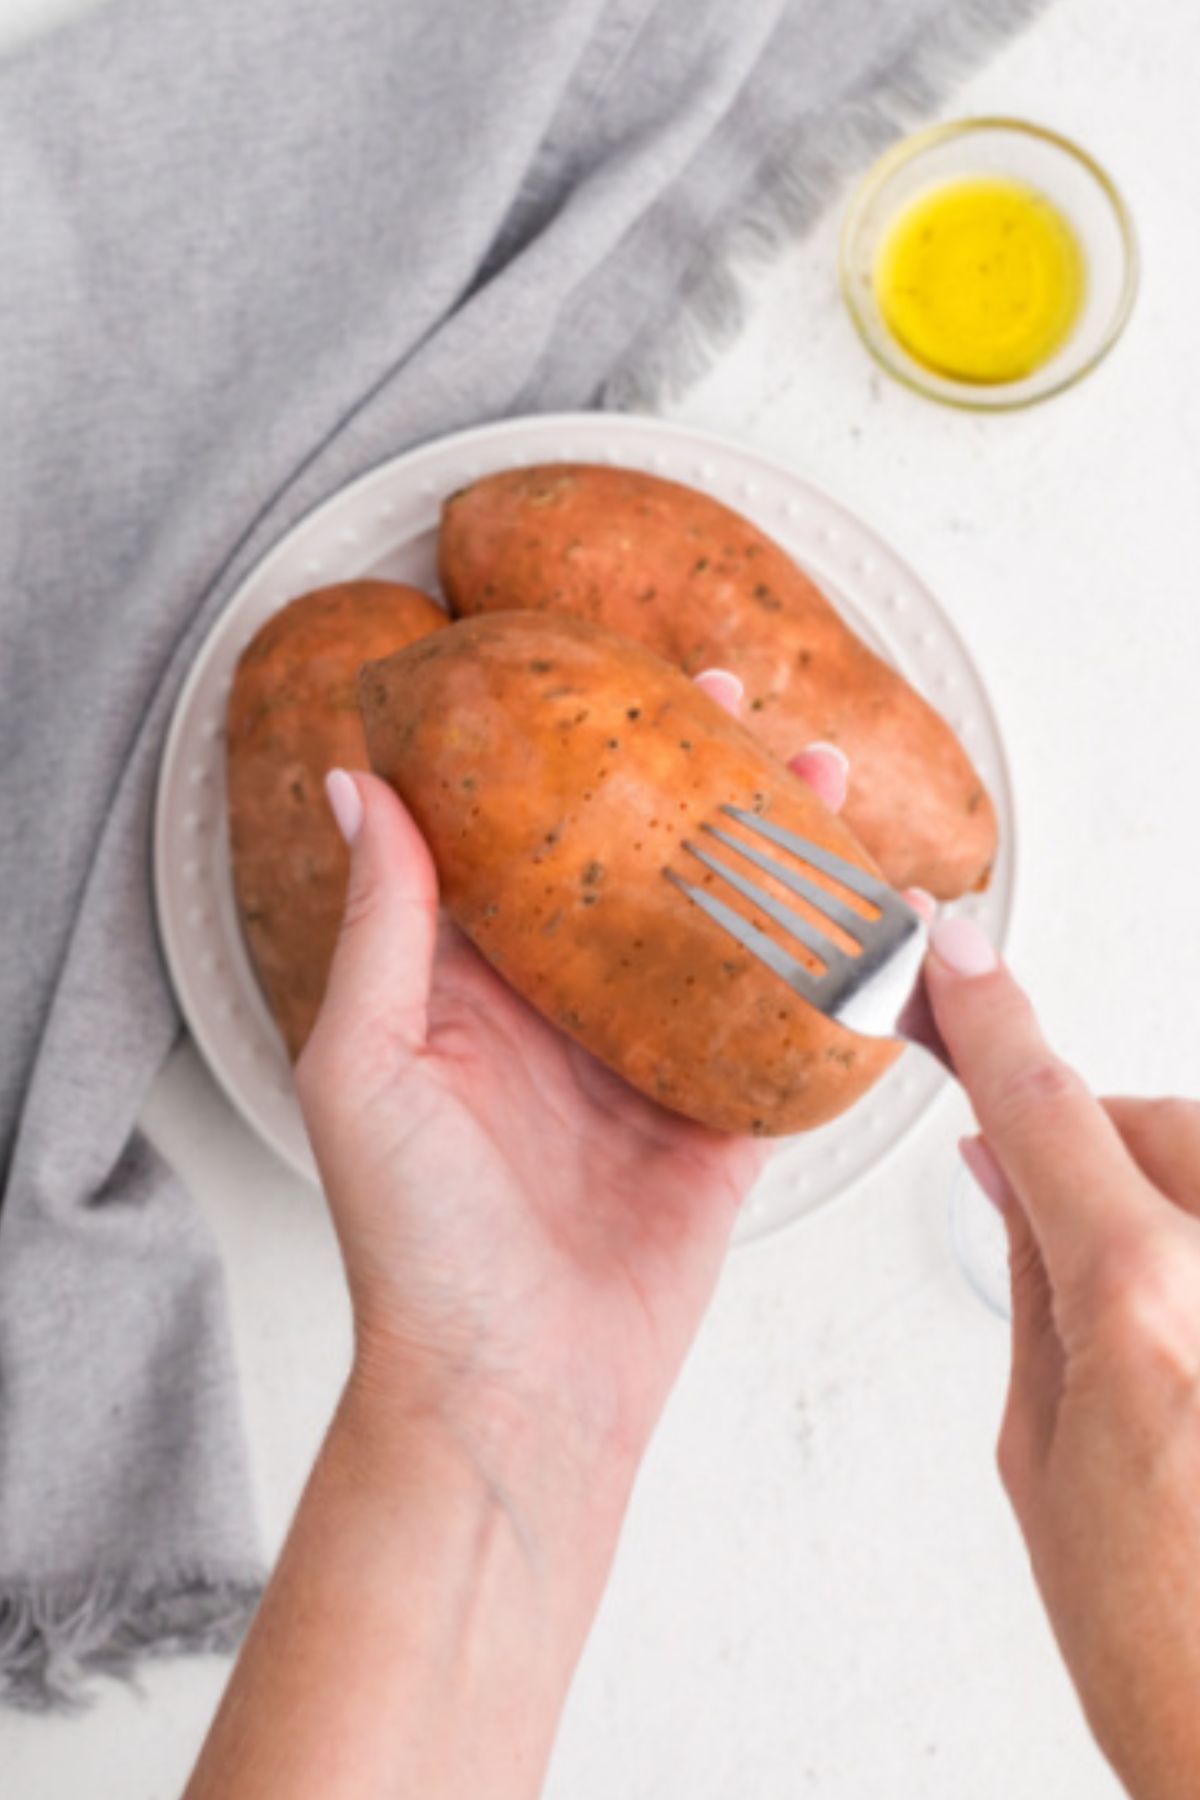 Hand holding a fork, pokeing holes in a sweet potato